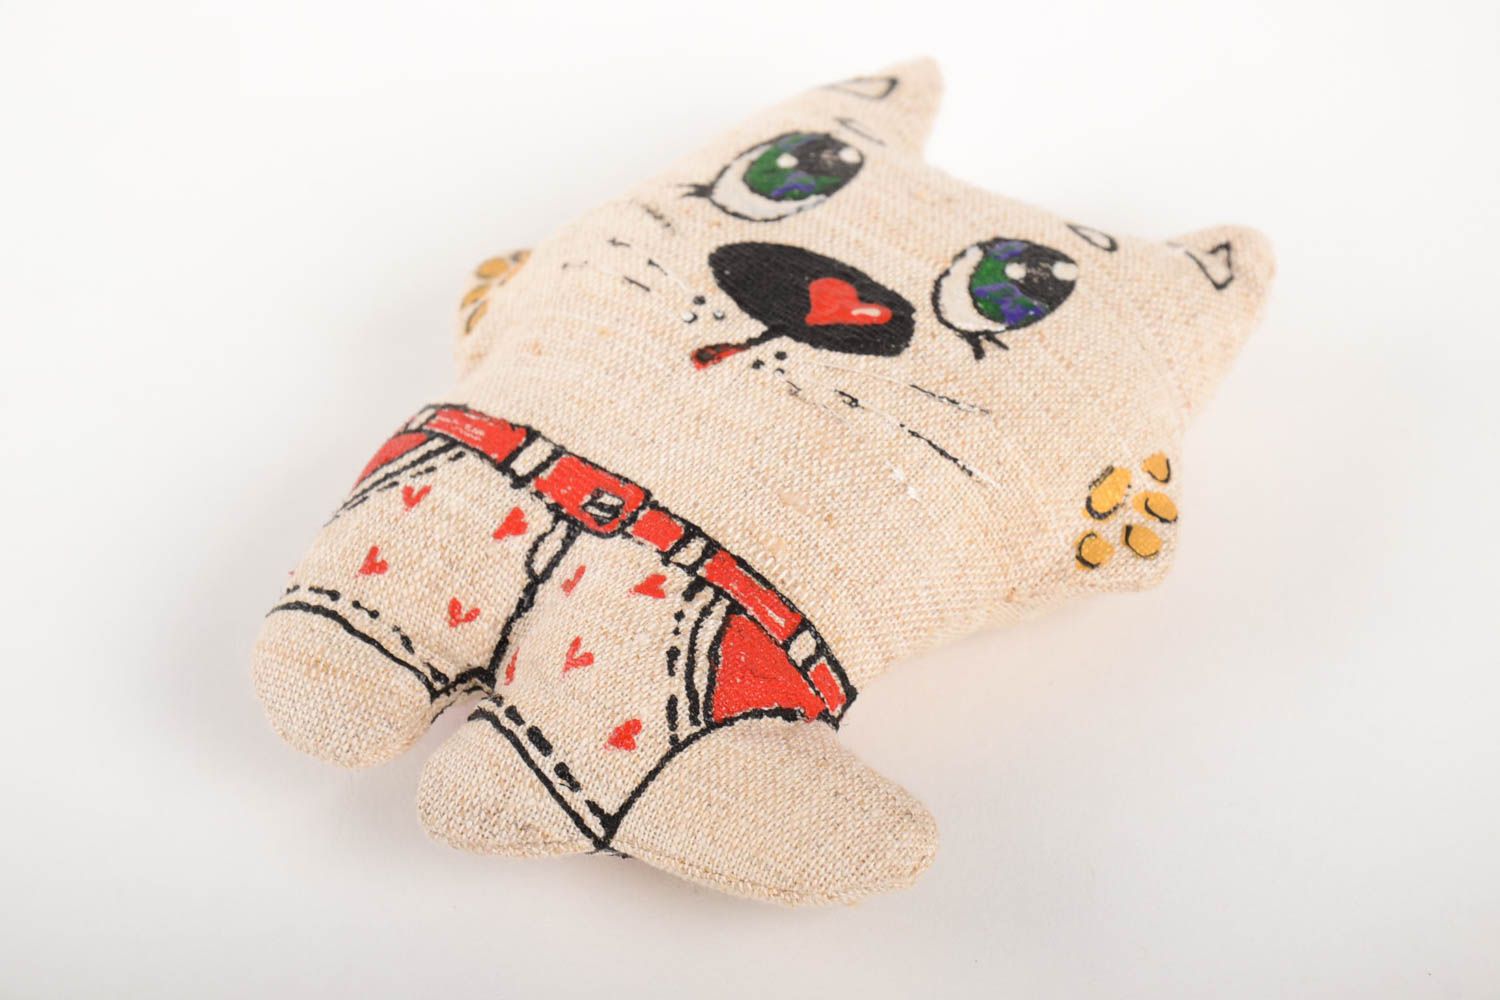 Handmade soft toy cat toy stuffed animals gifts for kids interior decorations photo 1